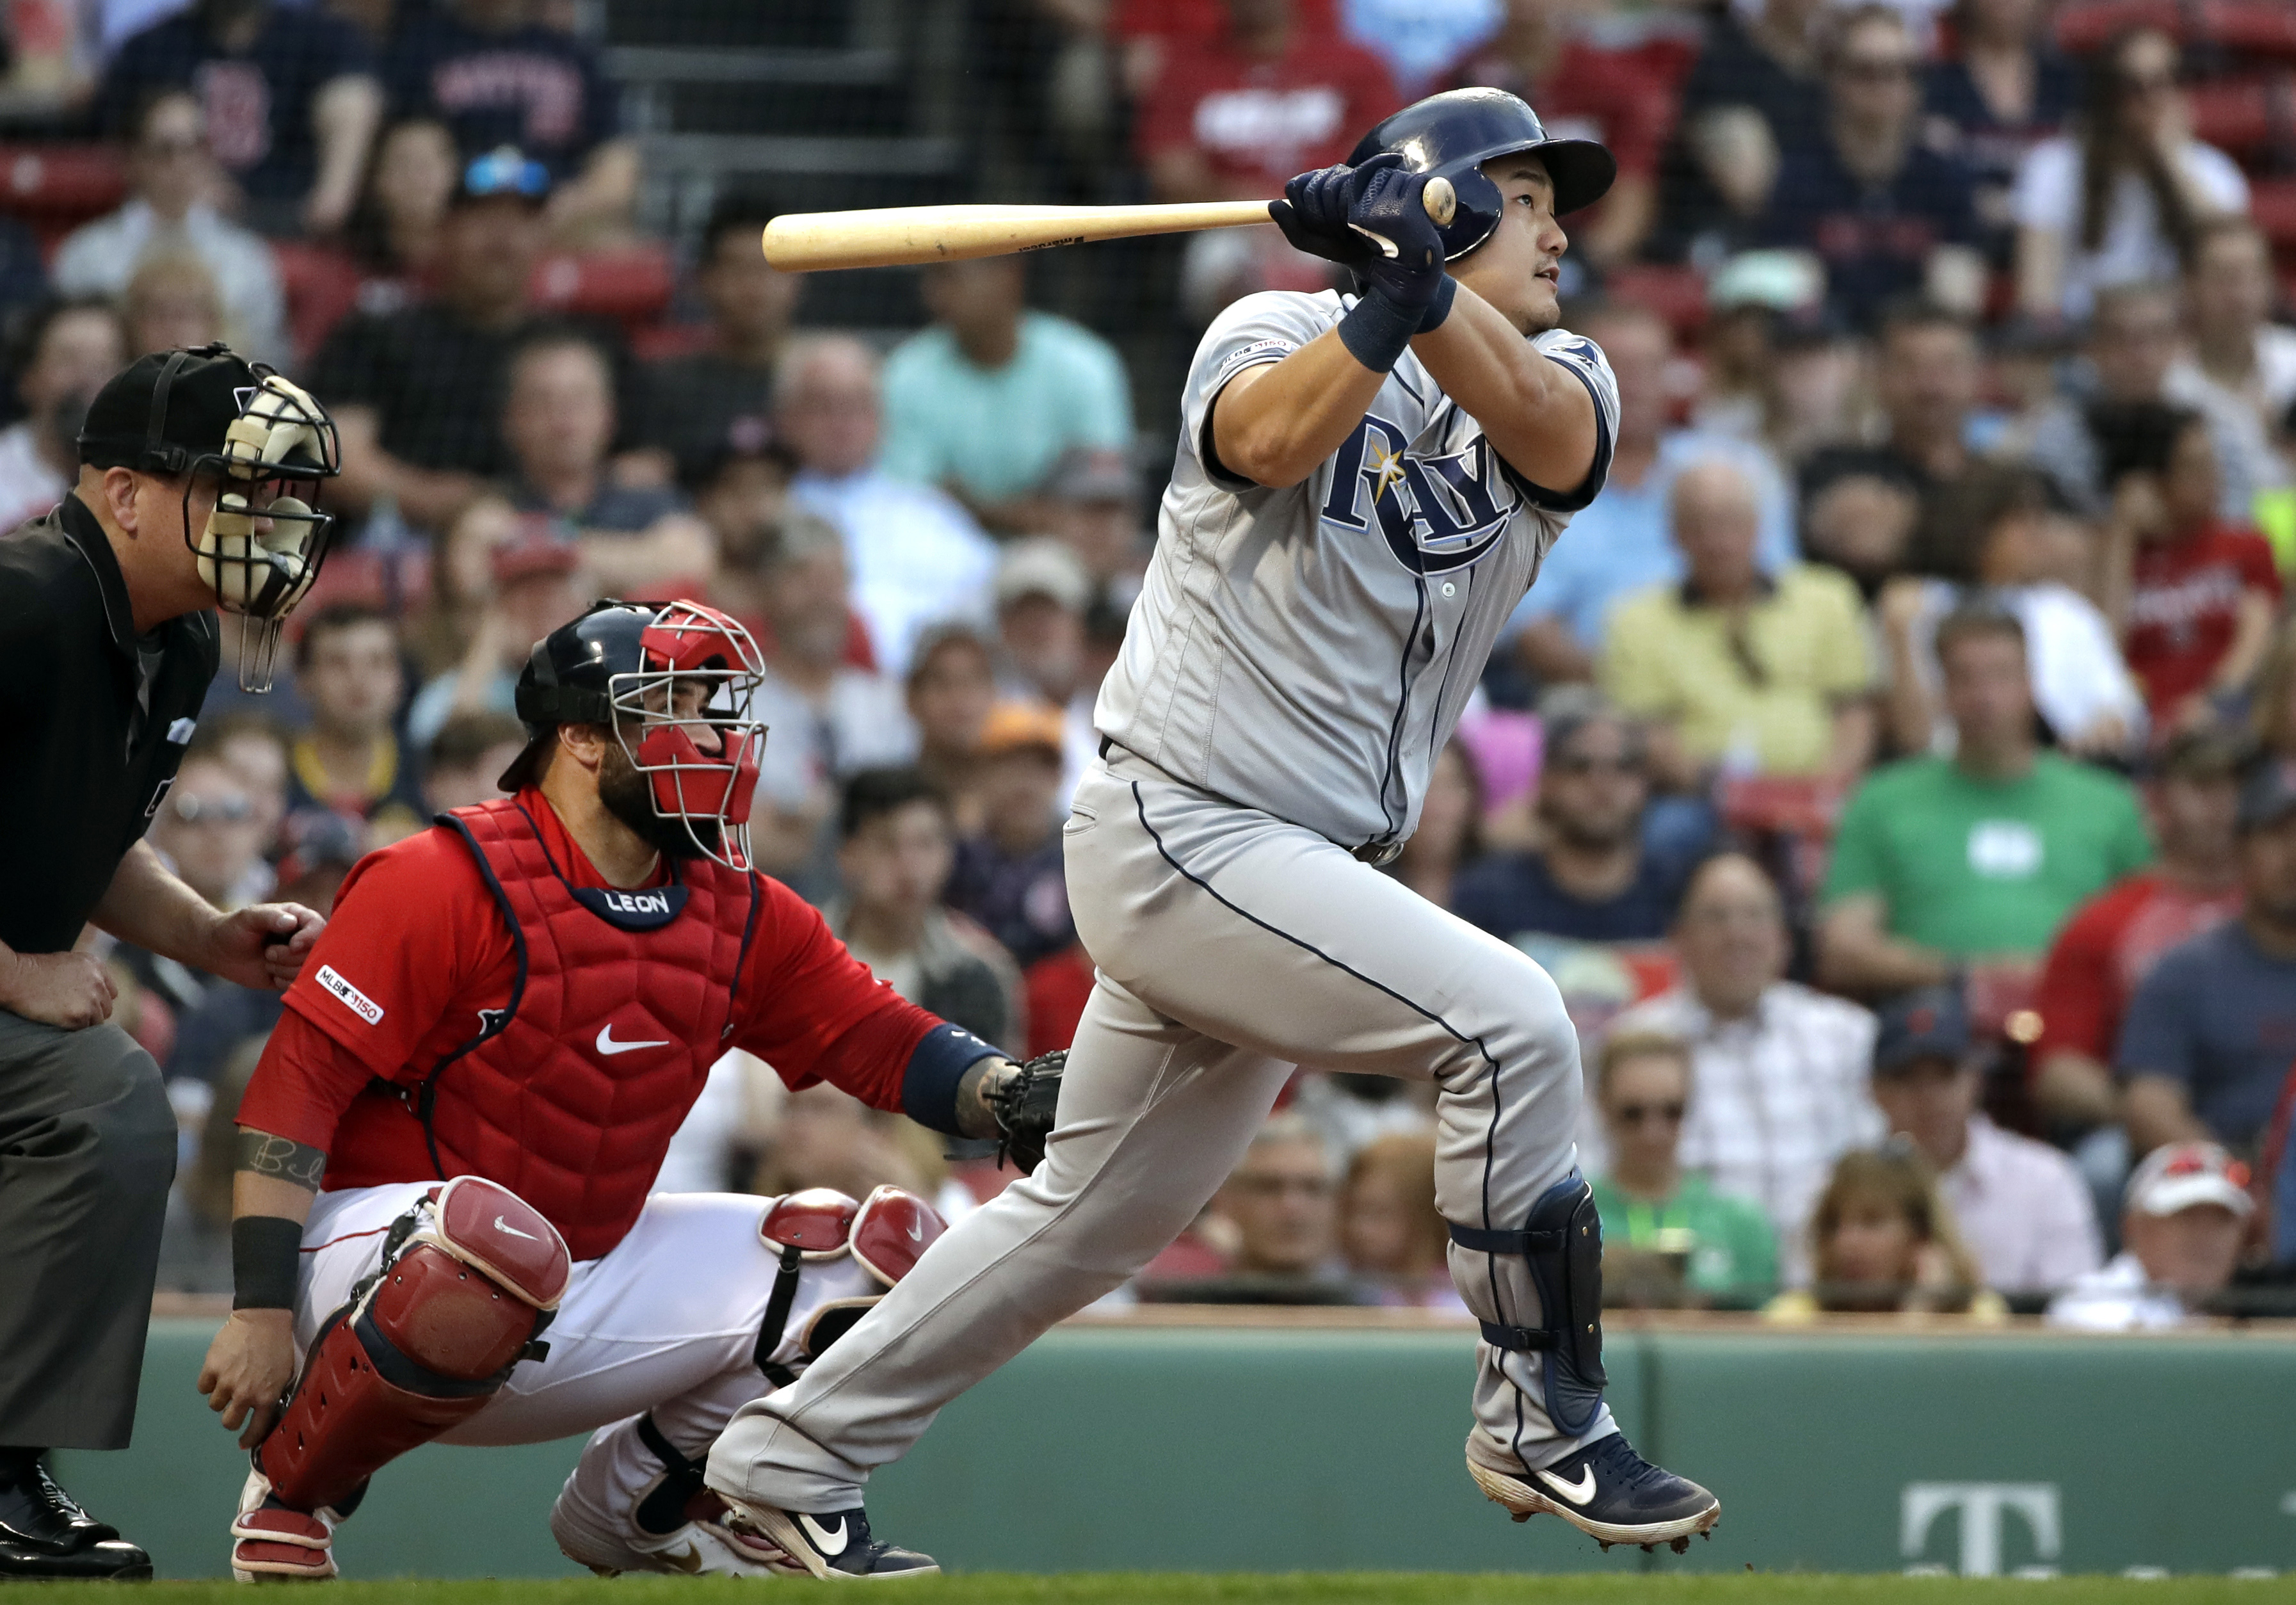 Yonny Chirinos pitches Tampa Bay past Red Sox 5-1